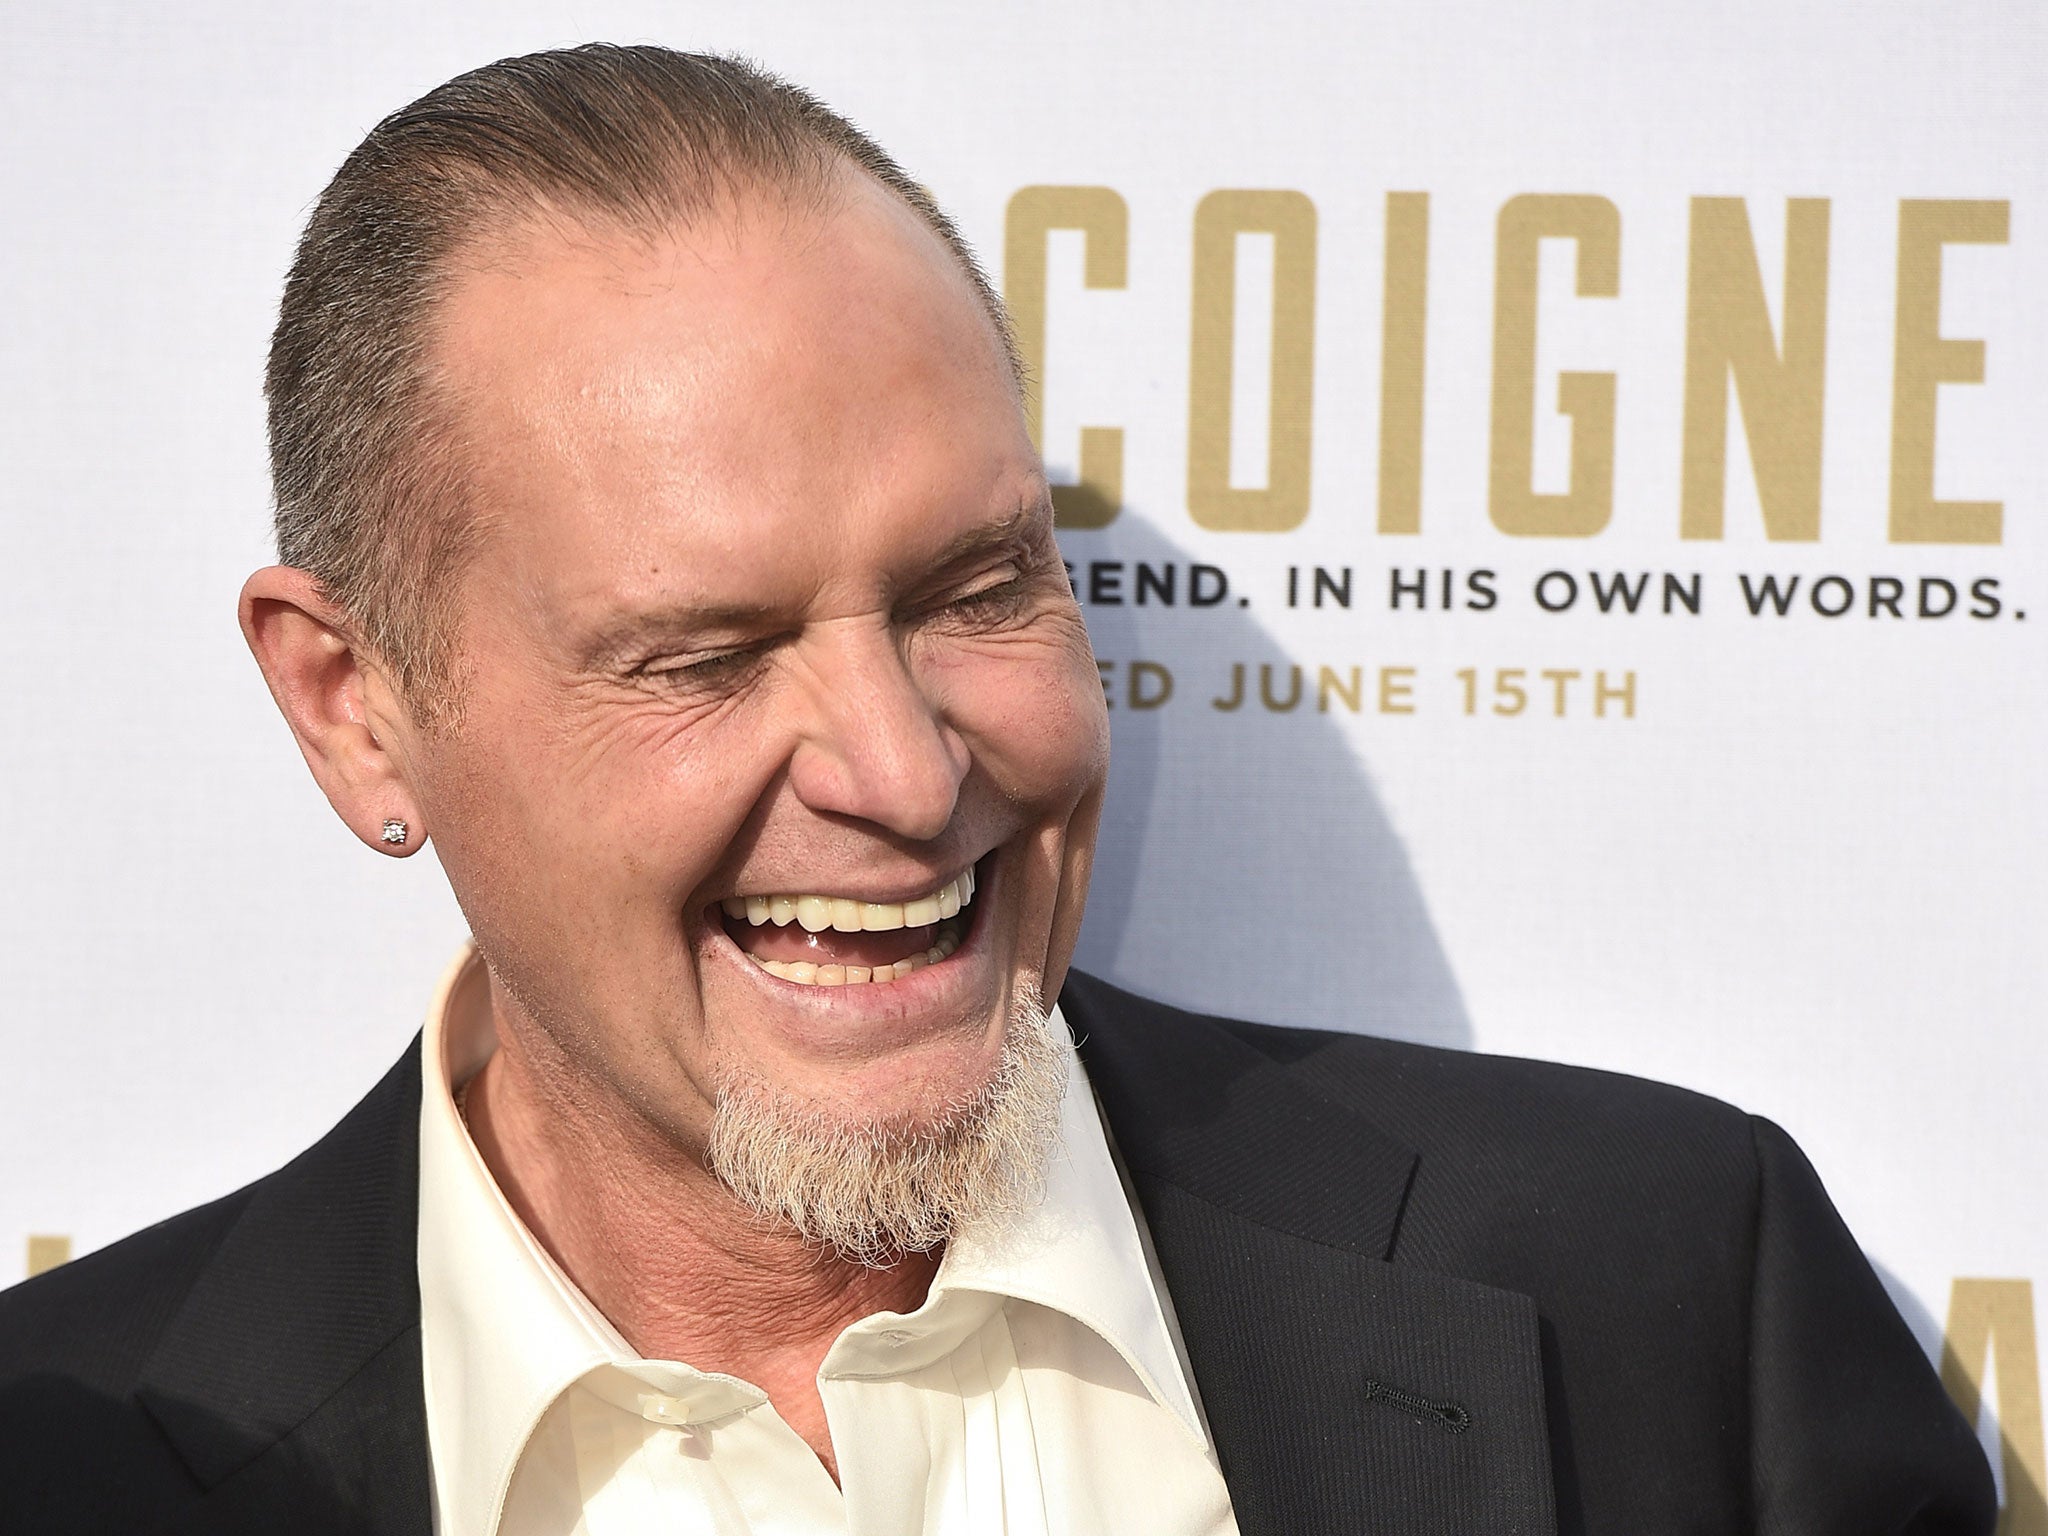 Former England footballer Paul Gascoigne at the premiere of his new film